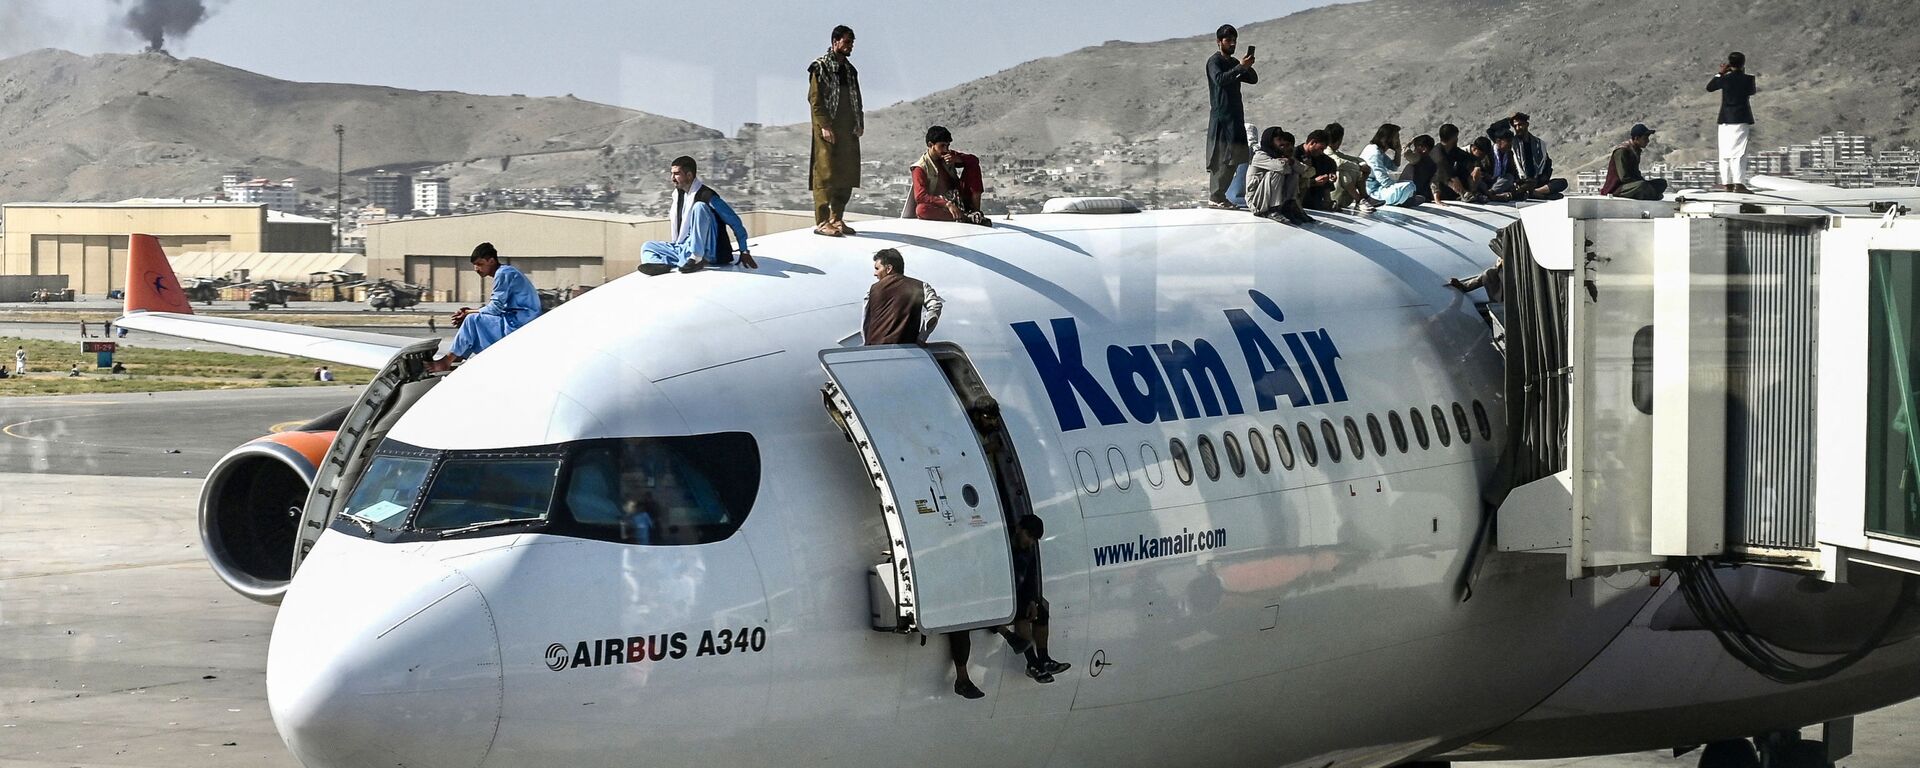 Afghan people climb atop a plane as they wait at the airport in Kabul on August 16, 2021, after a stunningly swift end to Afghanistan's 20-year war, as thousands of people mobbed the city's airport trying to flee the group's feared hardline brand of Islamist rule - Sputnik International, 1920